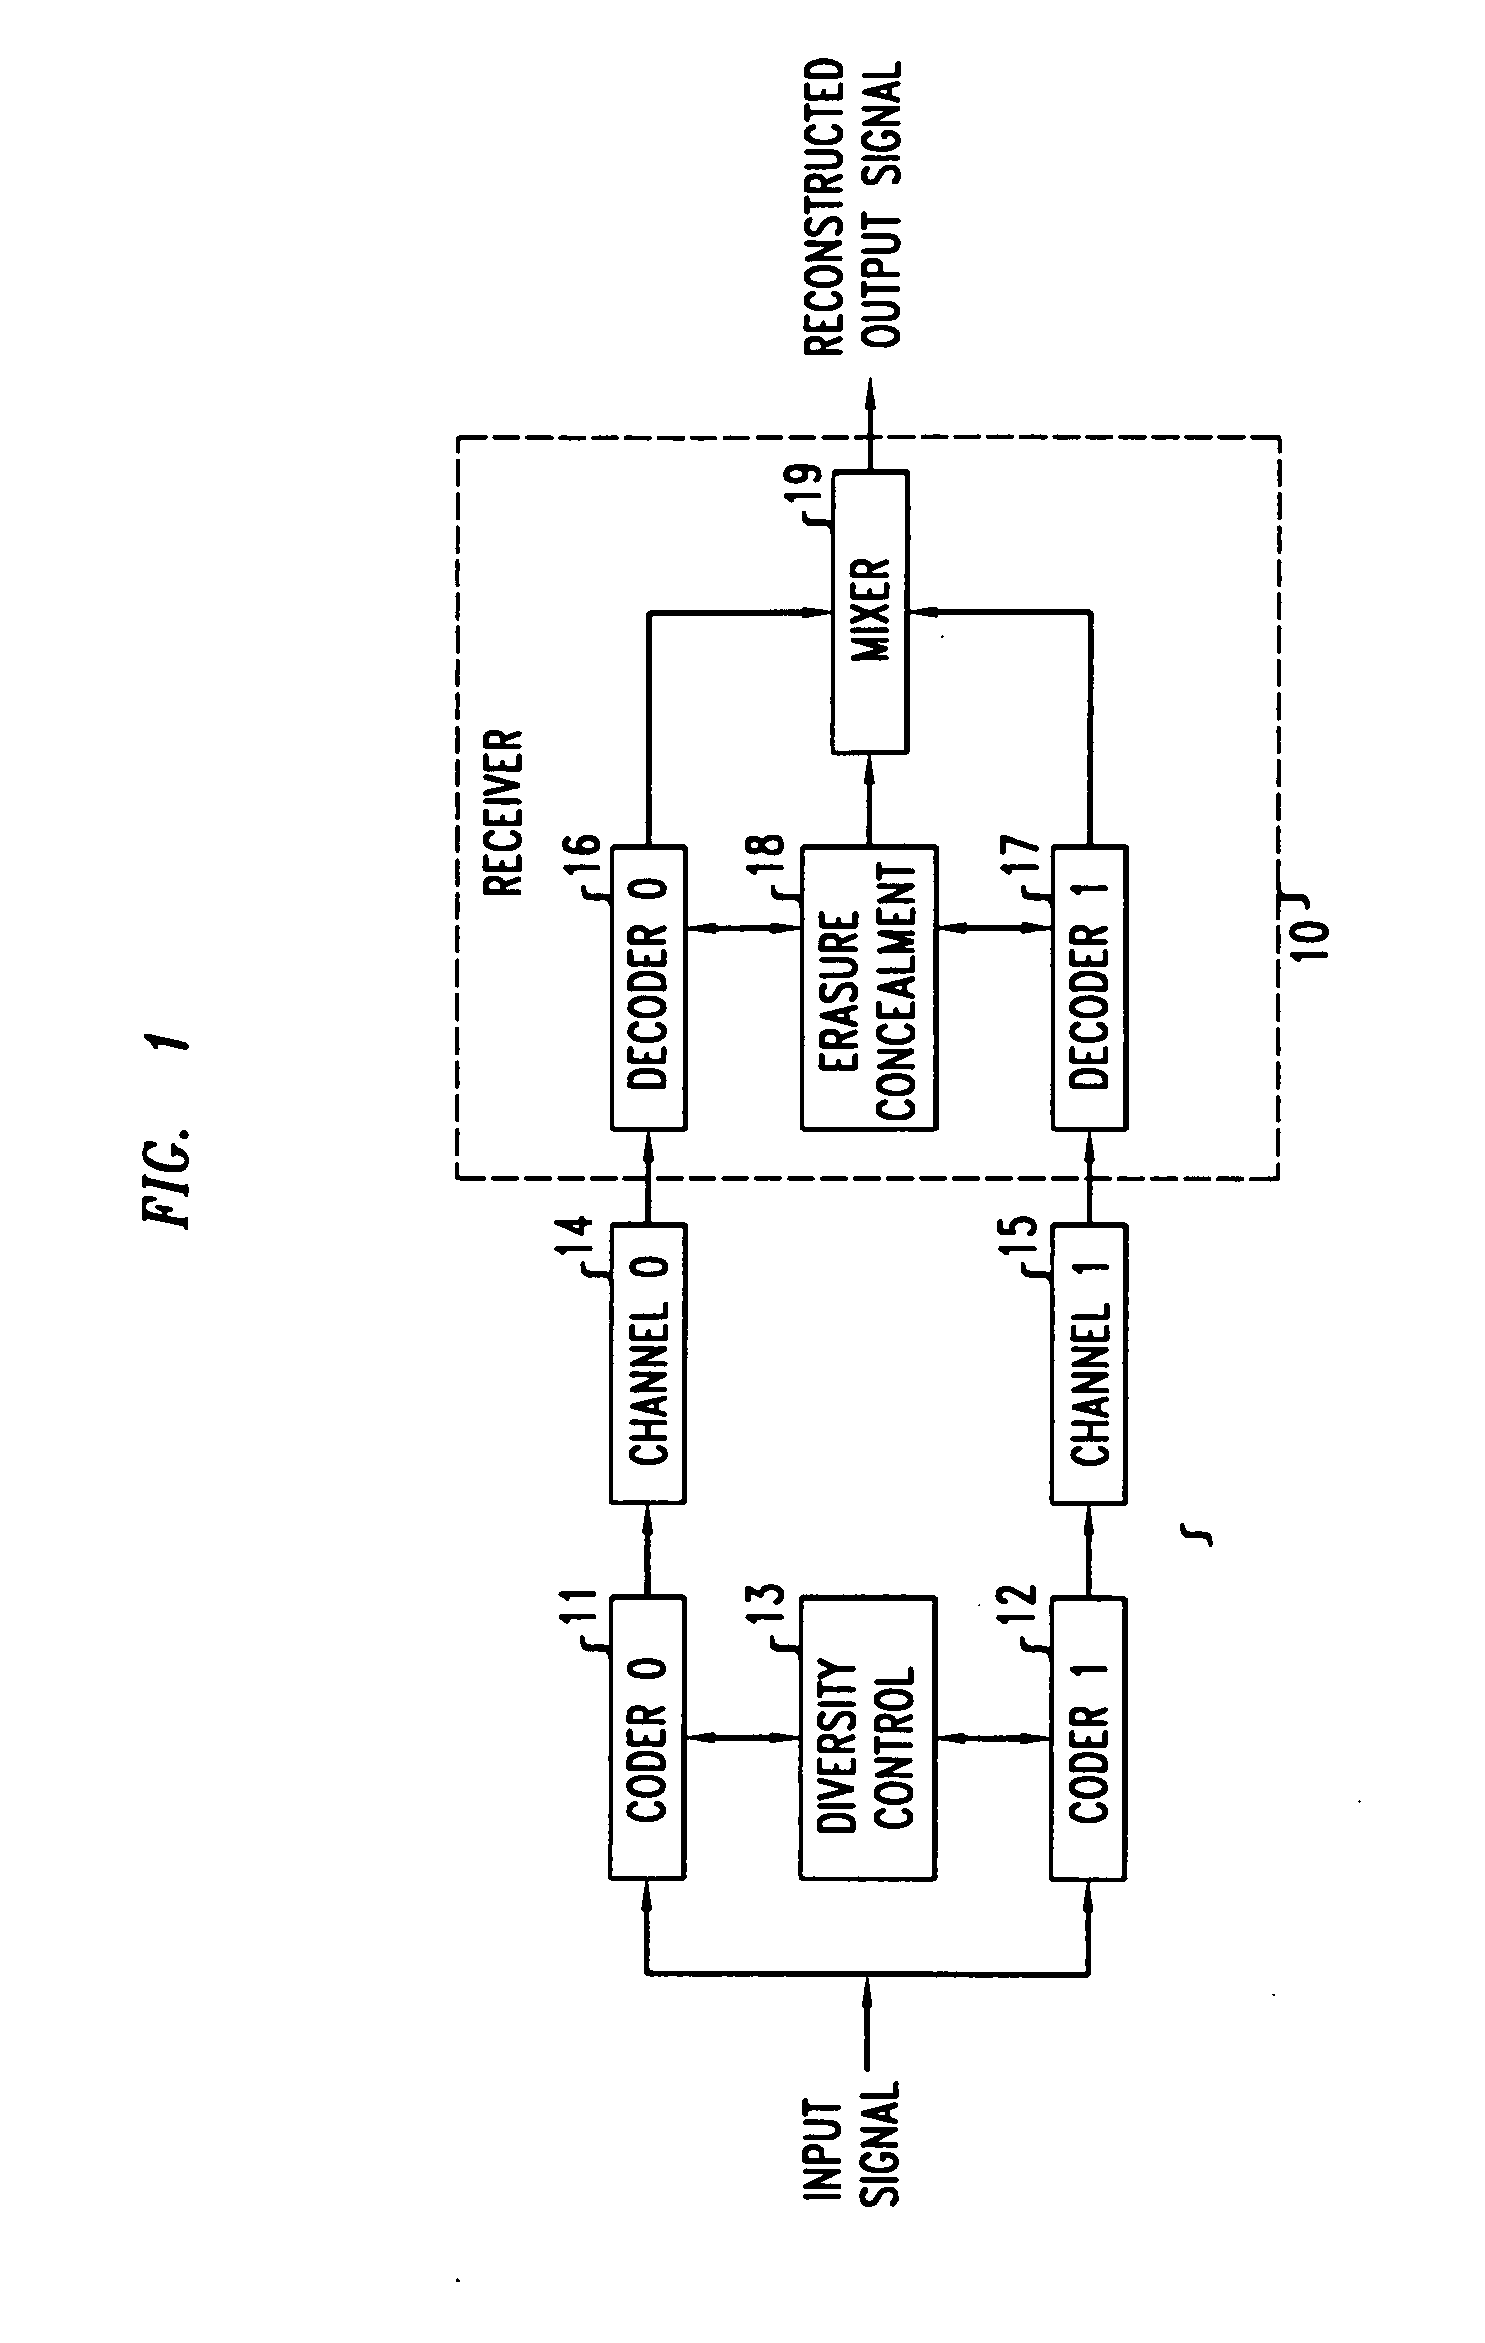 Method and apparatus for diversity control in mutiple description voice communication